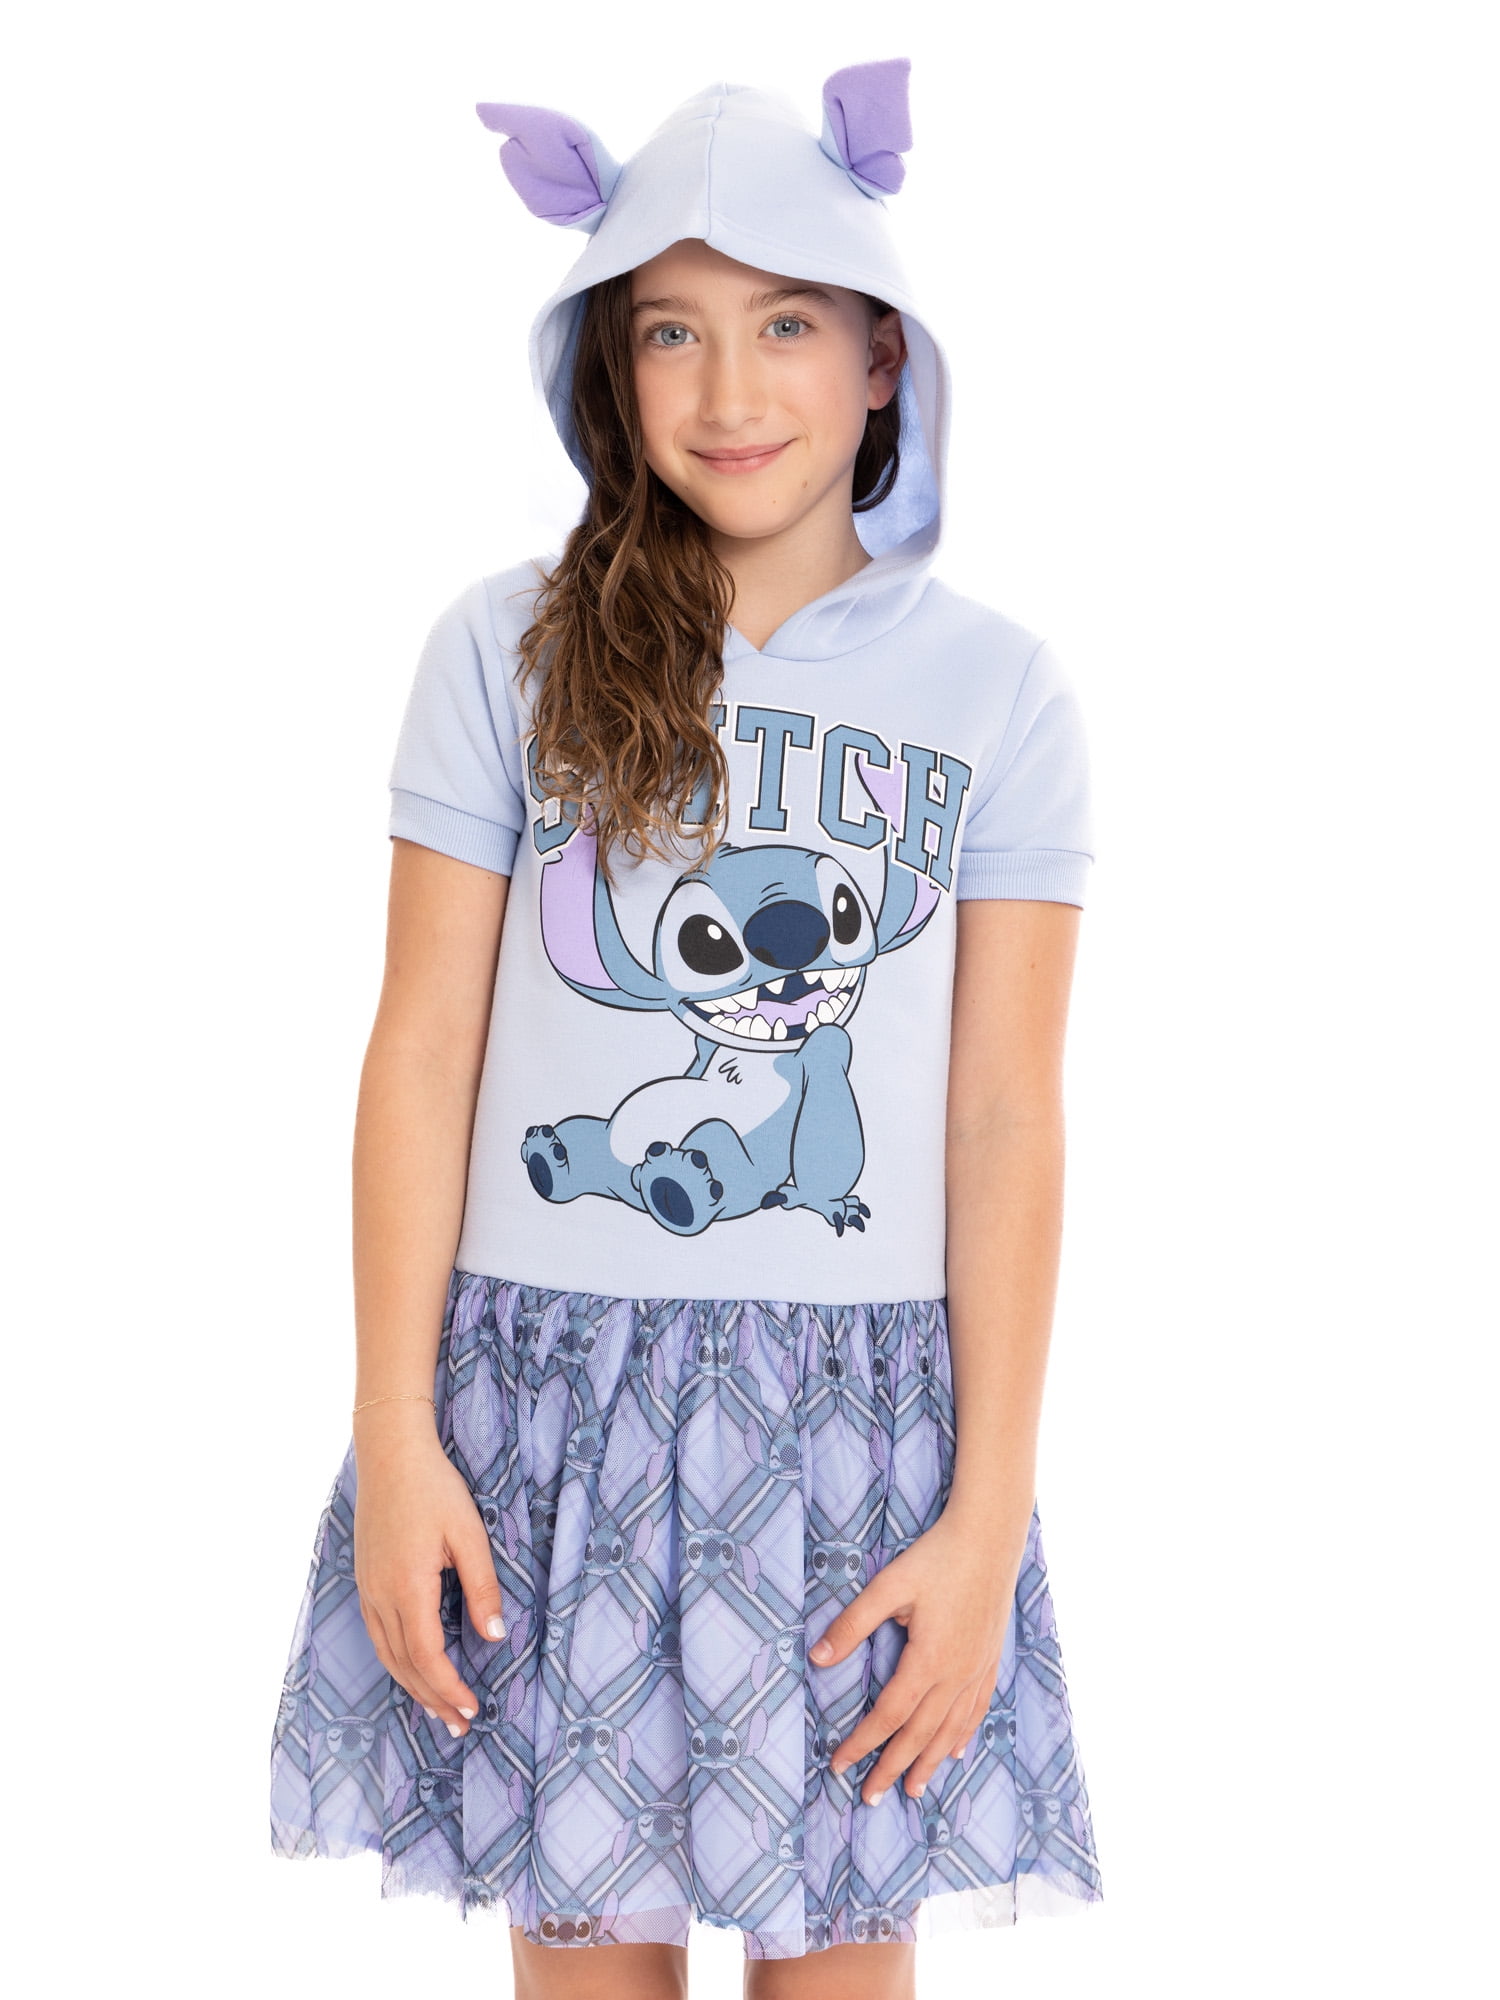 Lilo & Stitch Lilo and Stitch Girls Hoodie, Jogger and Shorts Outfit Set, 3-Piece, Sizes 4-16, Girl's, Size: Small (6-6X), Pink